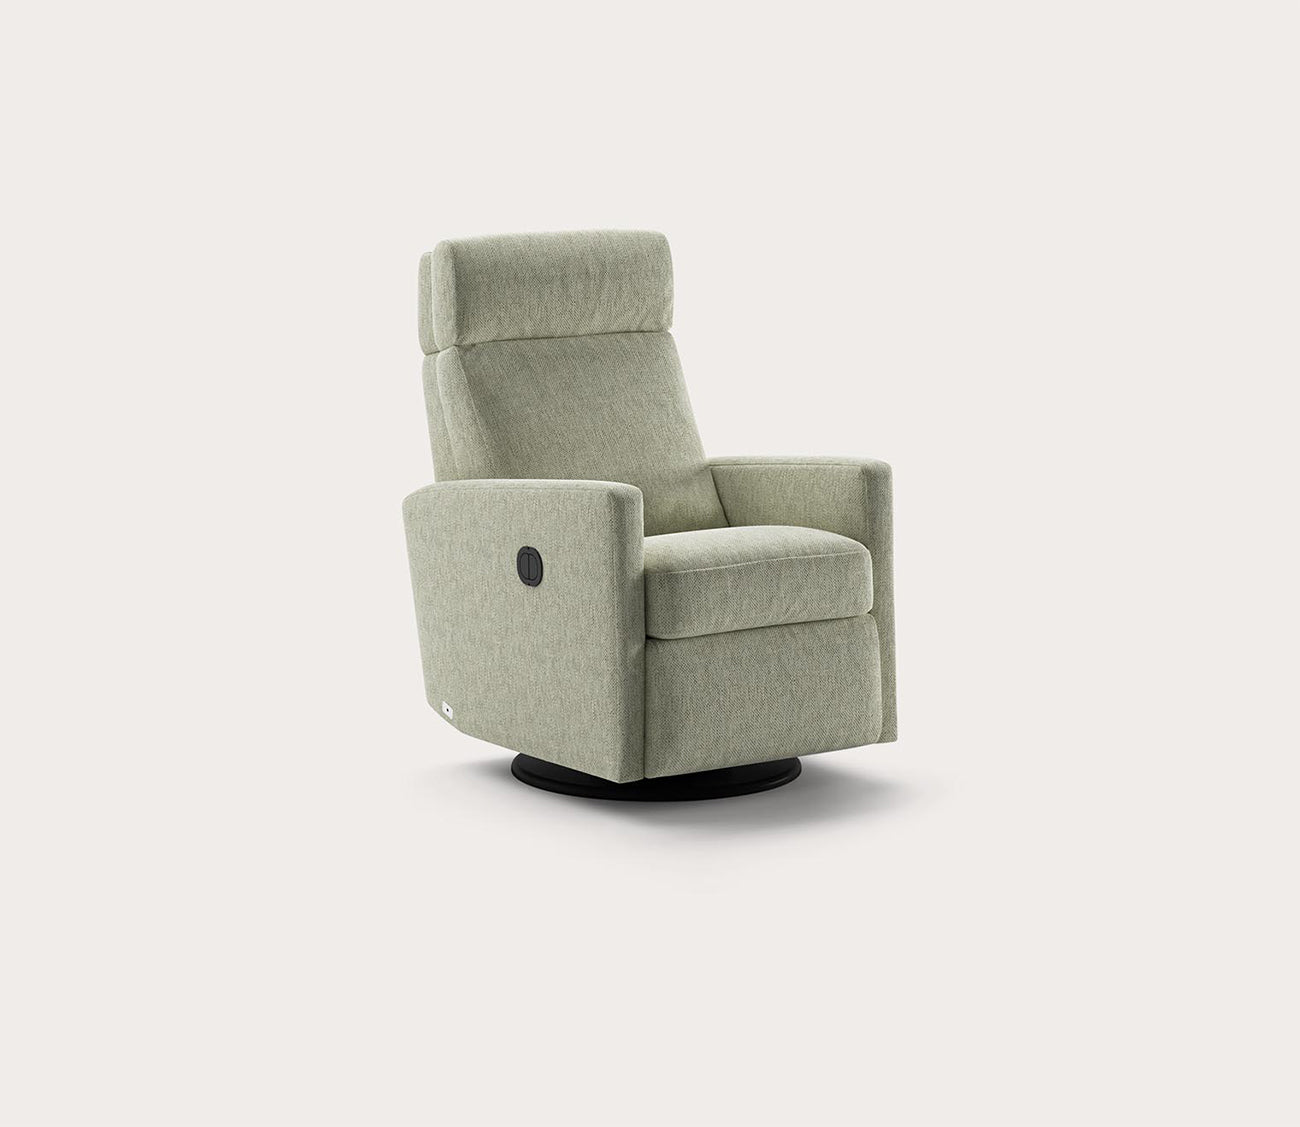 Track Lounger Recliner Chair by Luonto